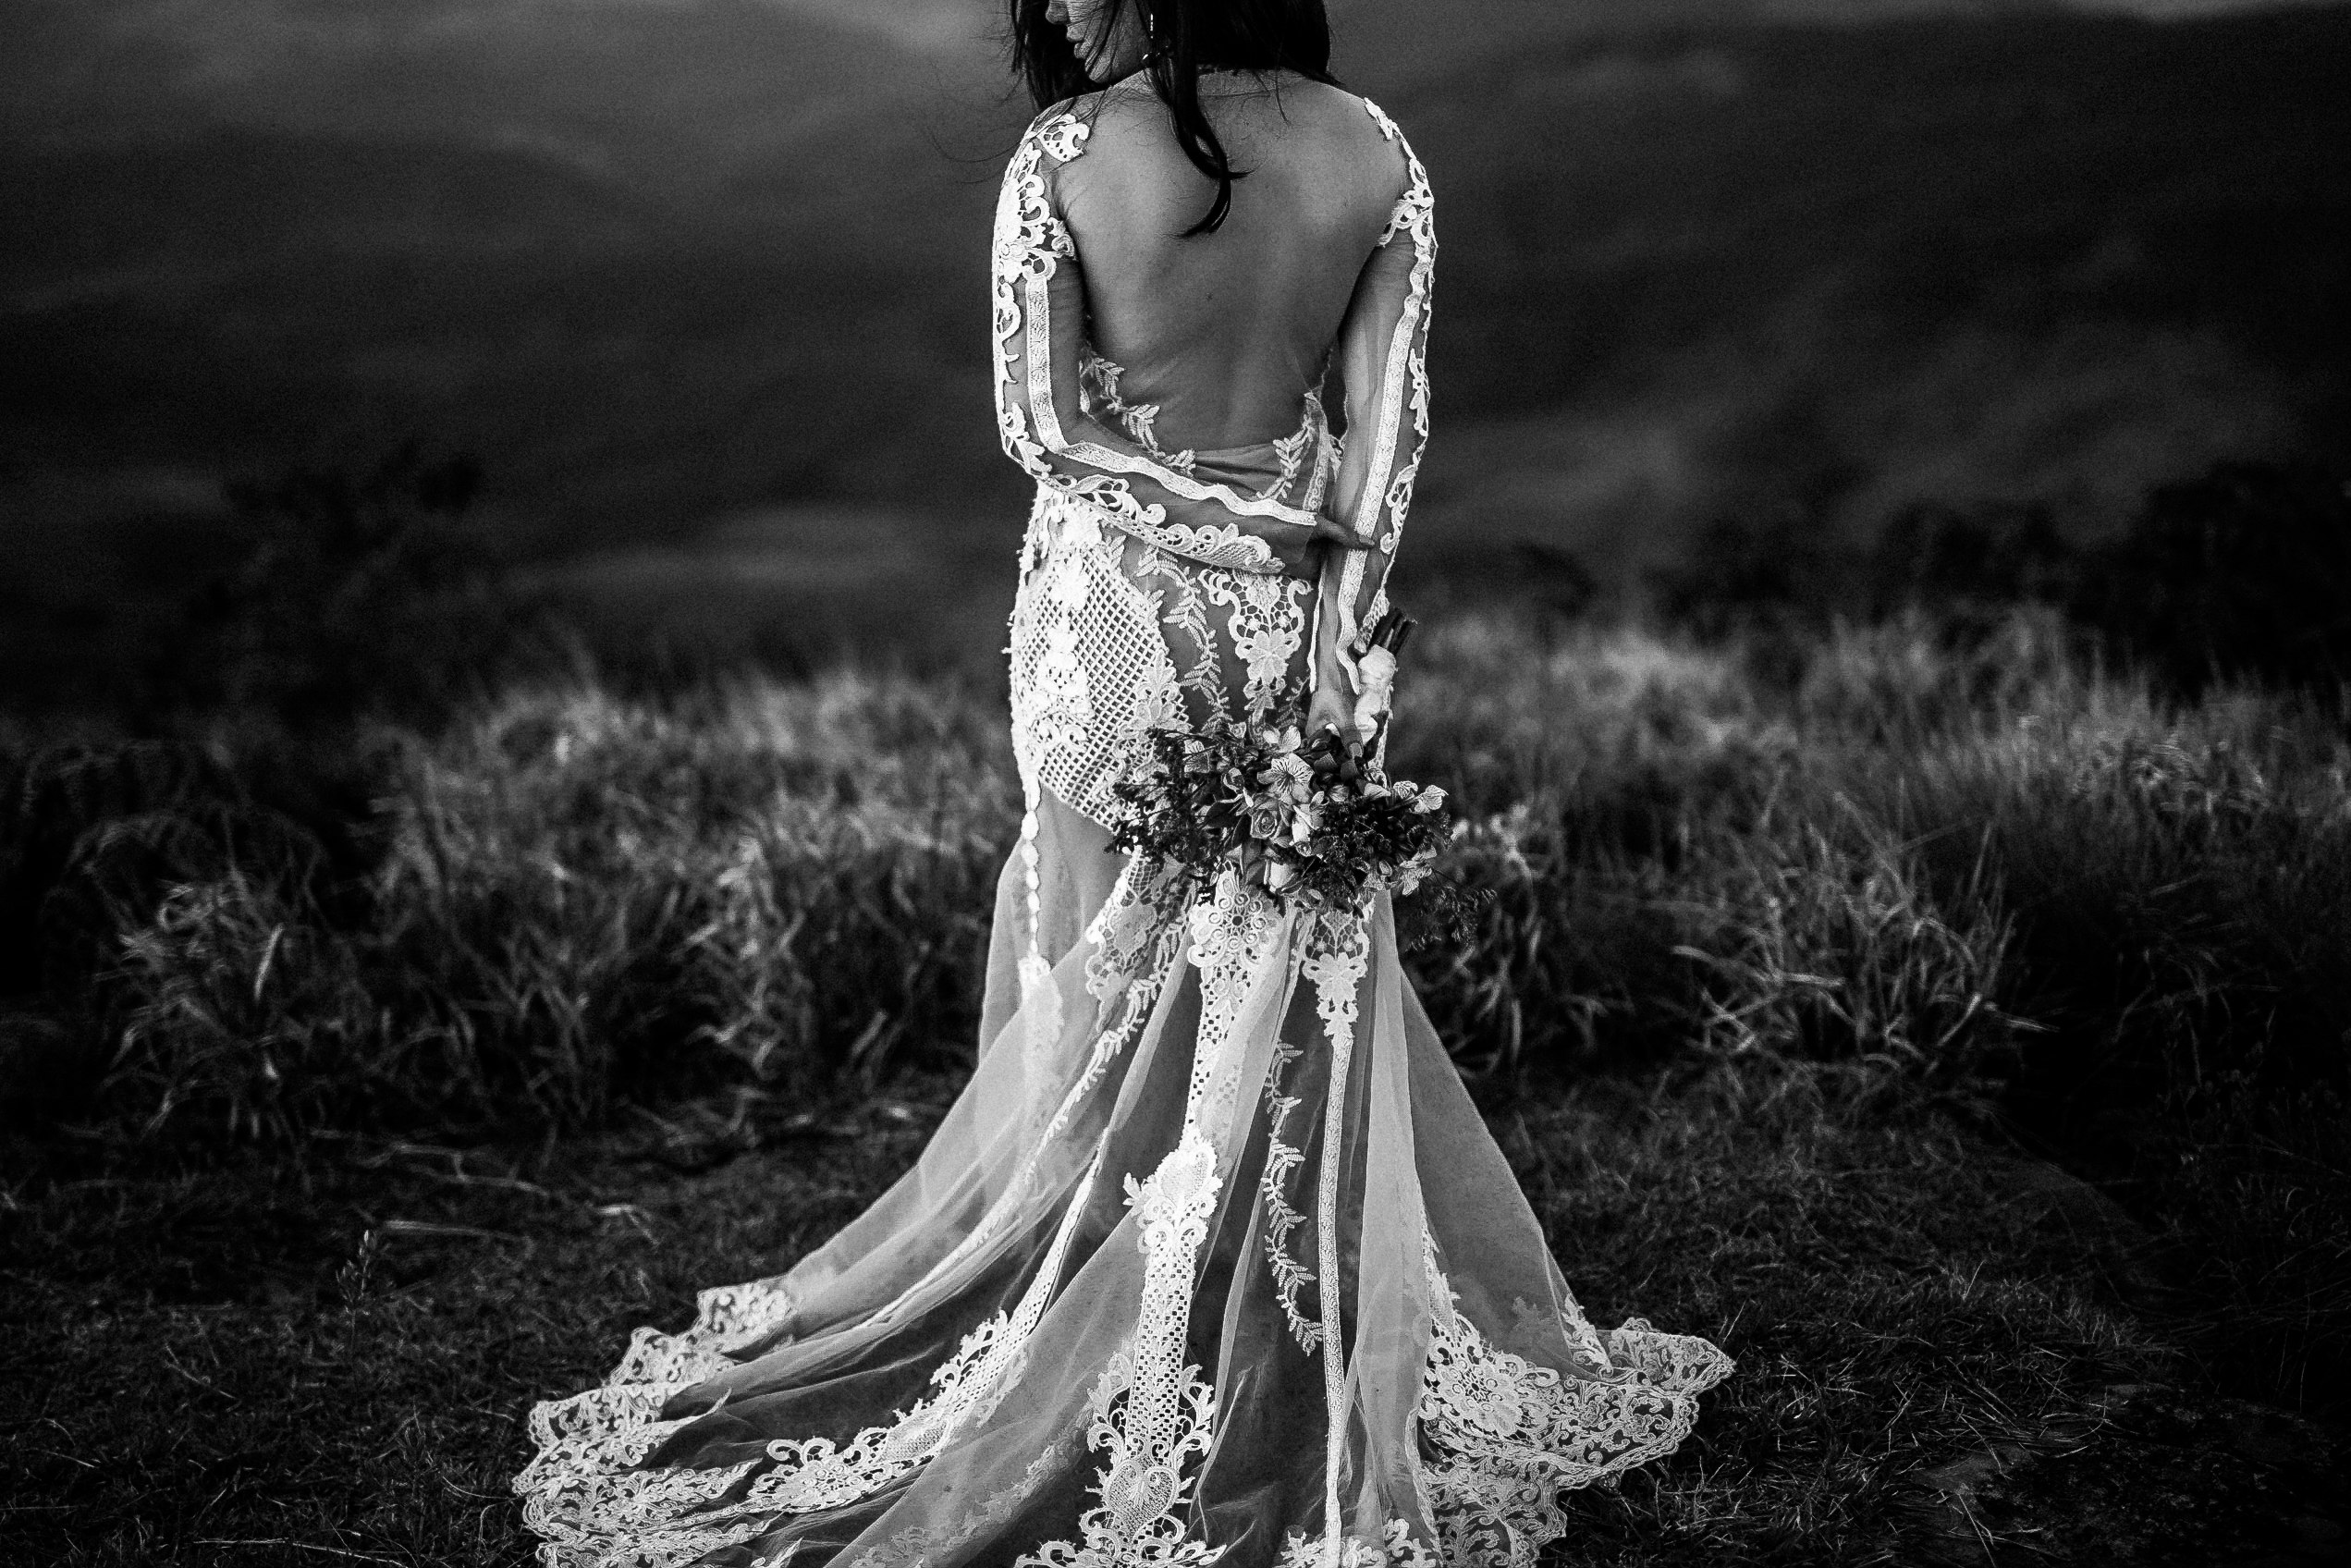 grayscale photo of woman wearing wedding dress holding bouquet of flower